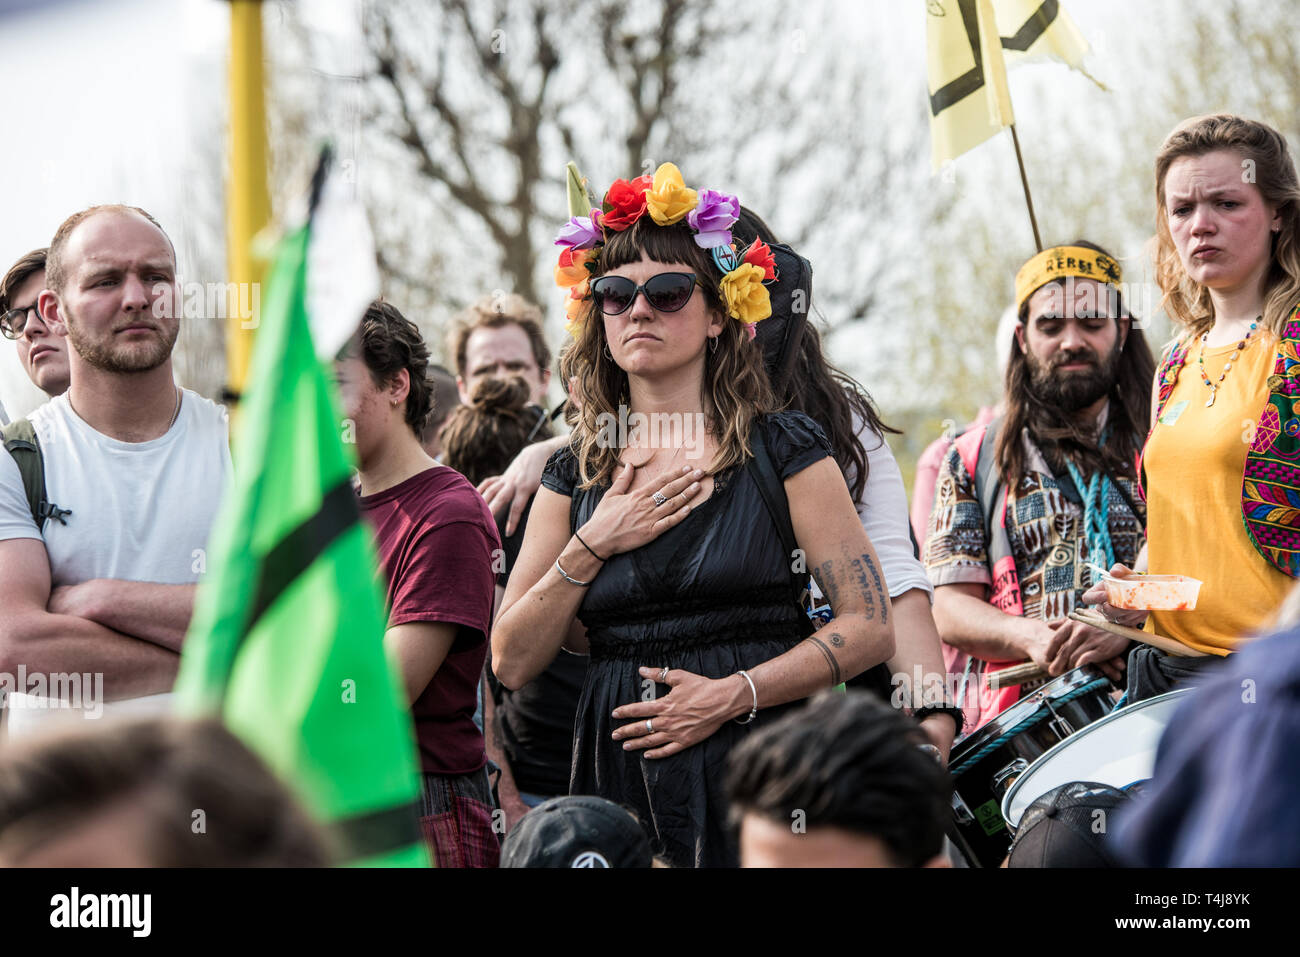 Protesters seen standing during the Extinction Rebellion strike in London.  Extinction Rebellion protesters have blocked five central London landmarks to protest against the government inaction on climate change. Stock Photo